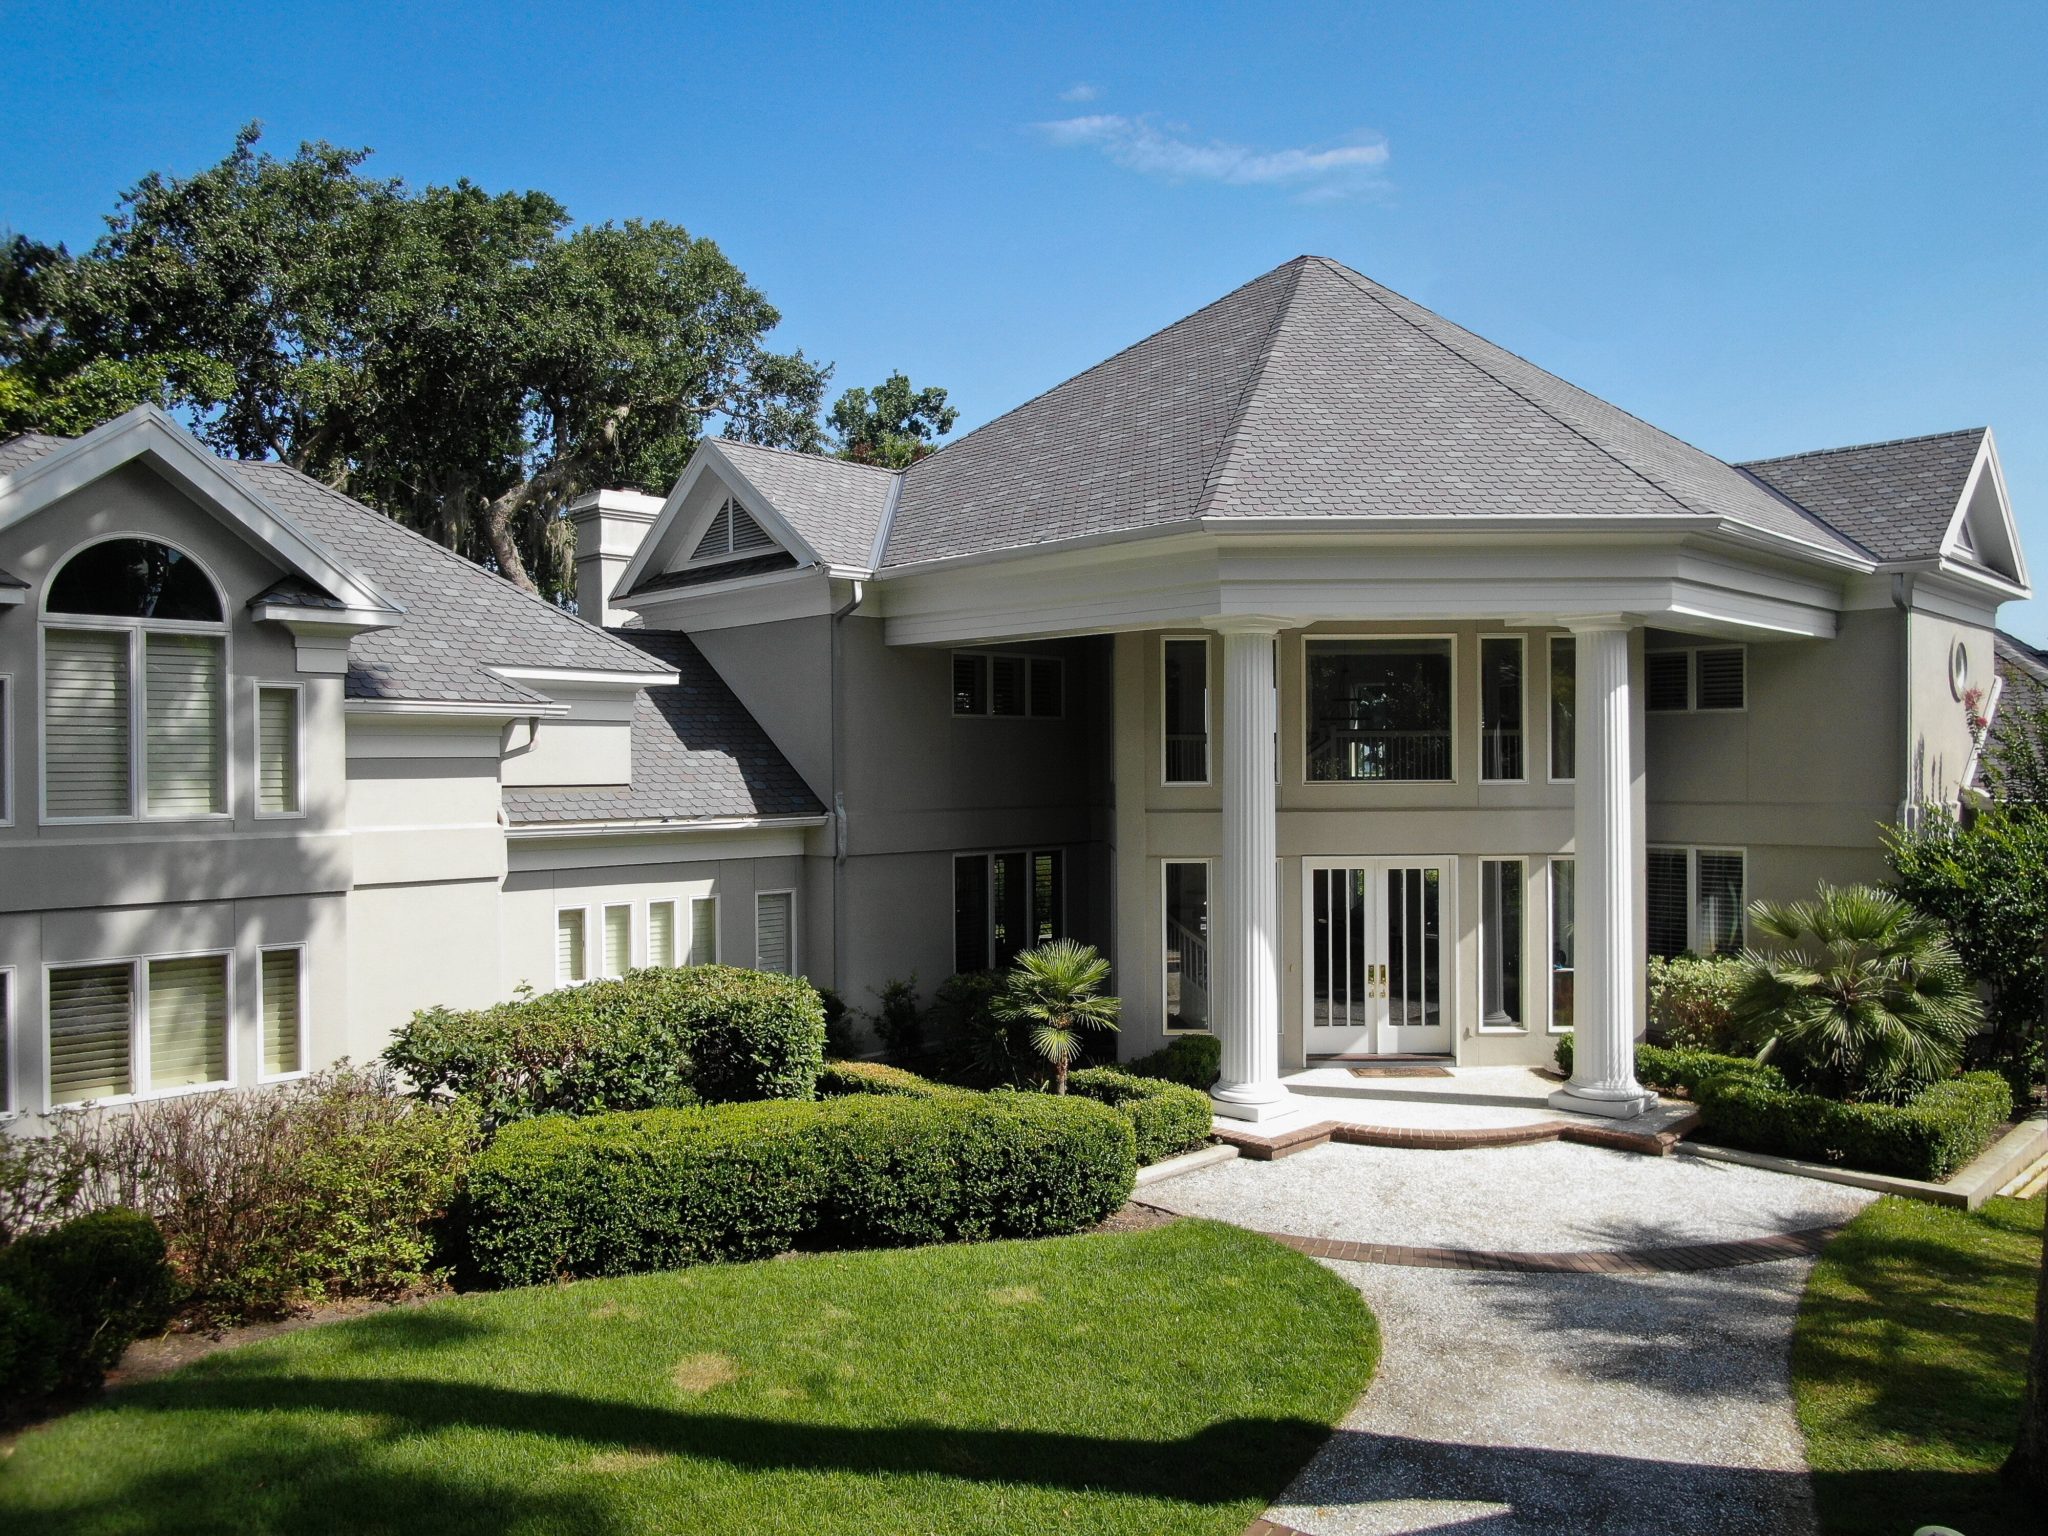 South Carolina F Wave Synthetic Shingles Install in Colonial Estate